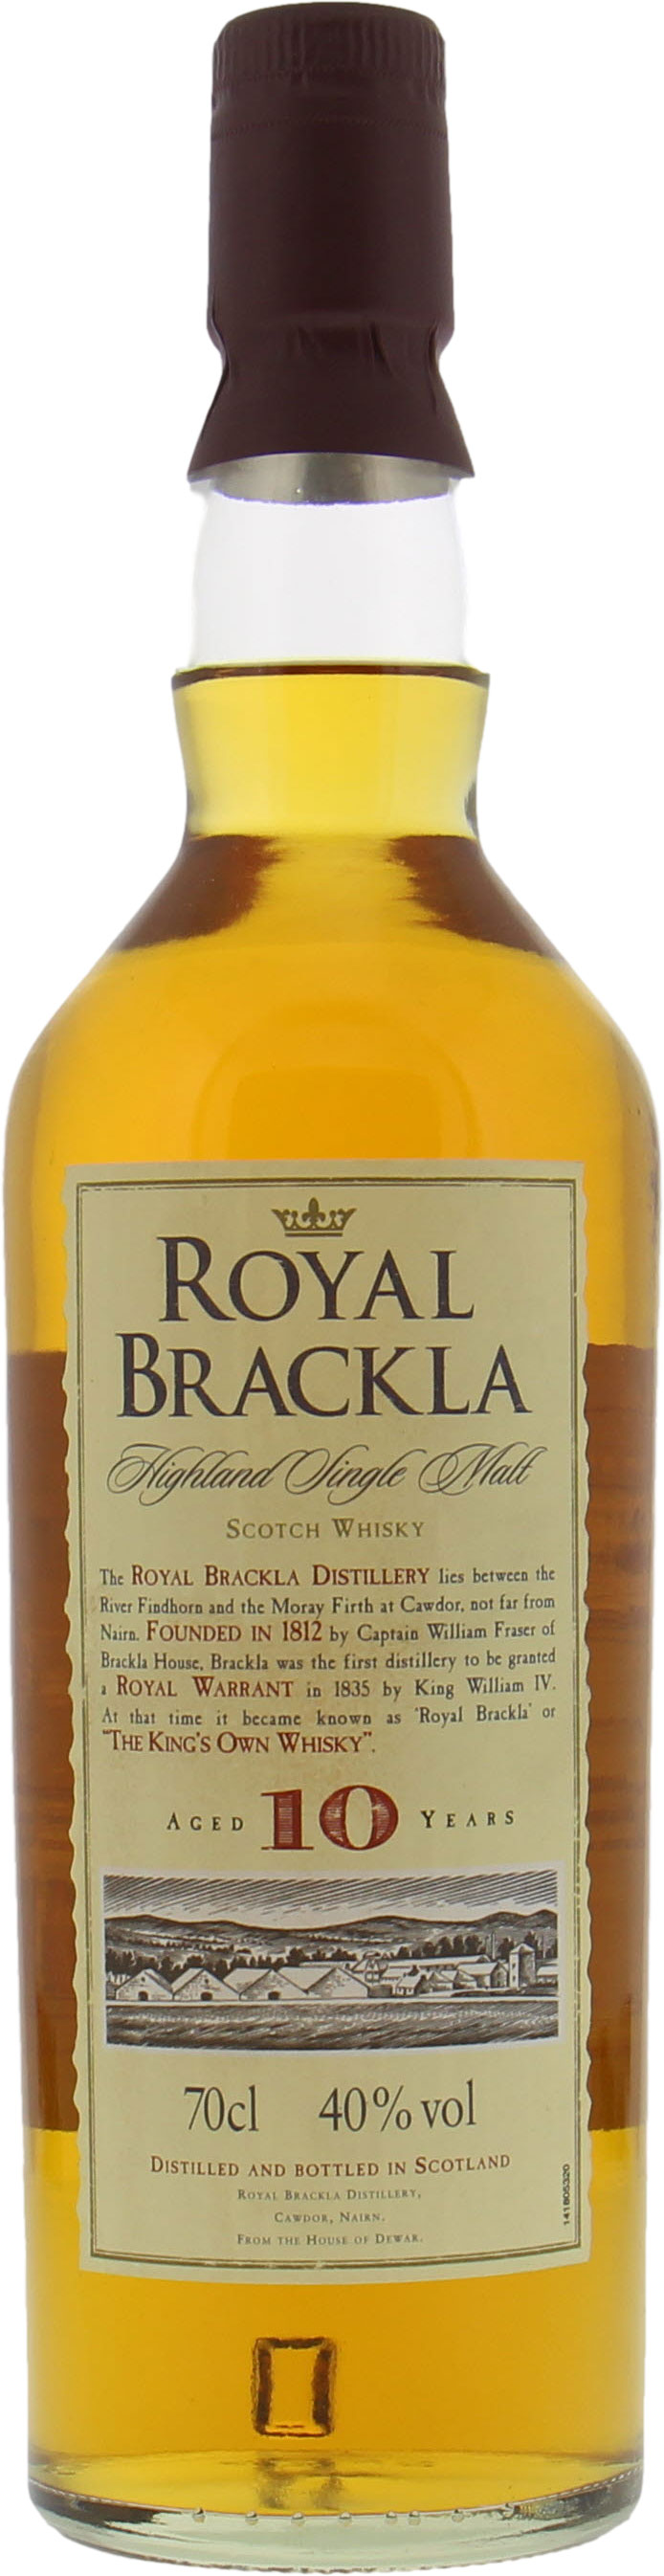 Royal Brackla - 10 Years Old 40% NV No Original Container Included!